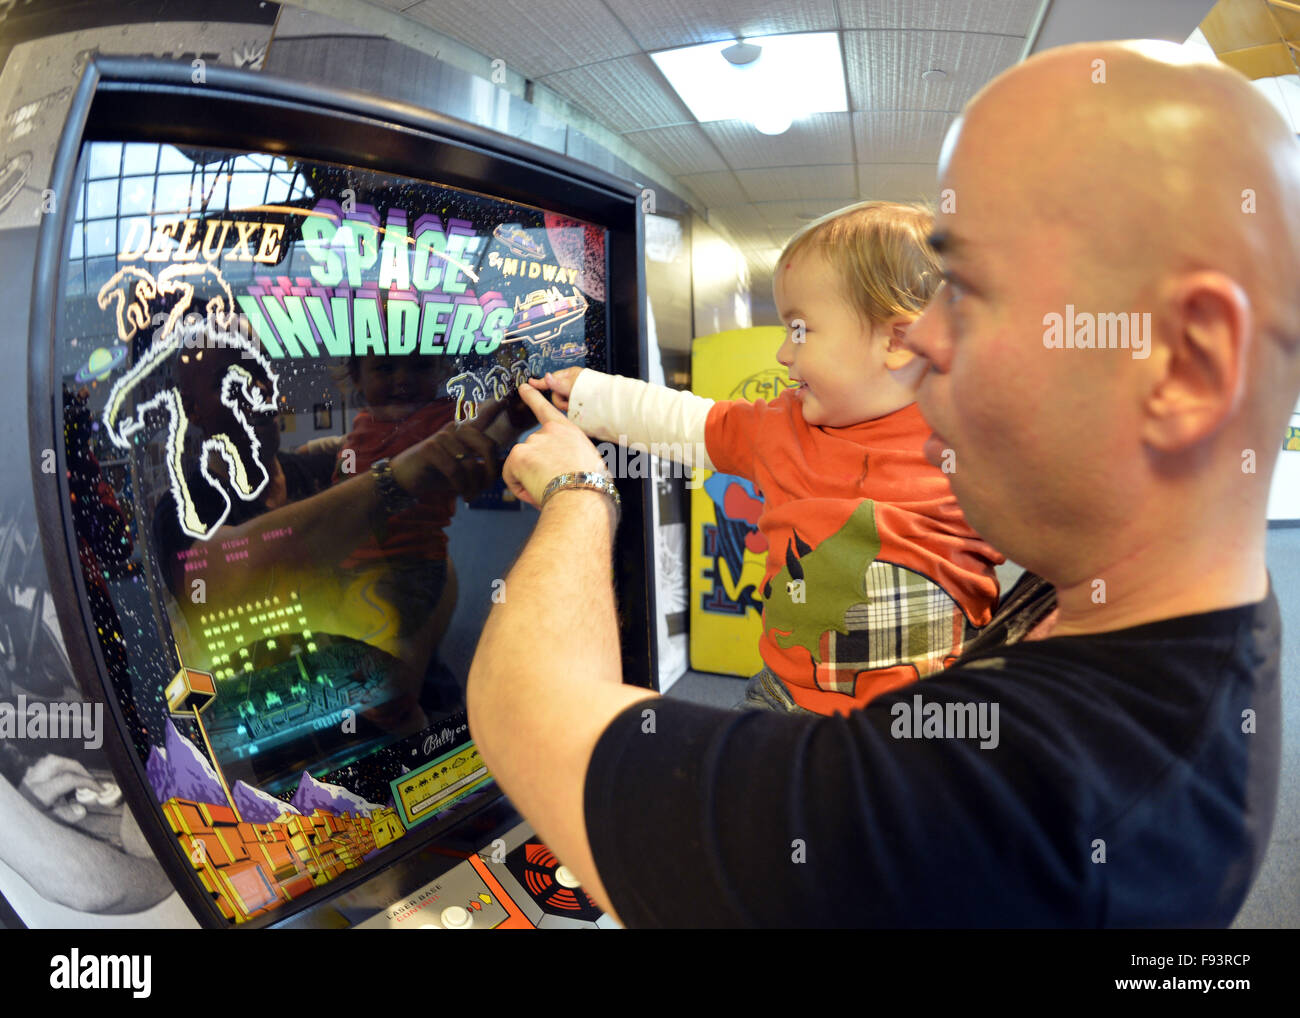 New York, USA. 12th Dec, 2015. DANNY TORRES holds his 19-month-old son MATEO TORRES, from Lindenhurst, as they point to yeti-like aliens on the Midway Bally 1980 video game Deluxe Space Invaders, which the dad played during Opening Day of Arcade Age exhibit, at Cradle of Aviation Museum in Long Island. Admission includes unlimited free pay-to-play of video arcade games, and games history is displayed outside arcade area. Exhibit runs from Dec. 12, 2015 through April 3, 2016. © Ann Parry/ZUMA Wire/Alamy Live News Stock Photo